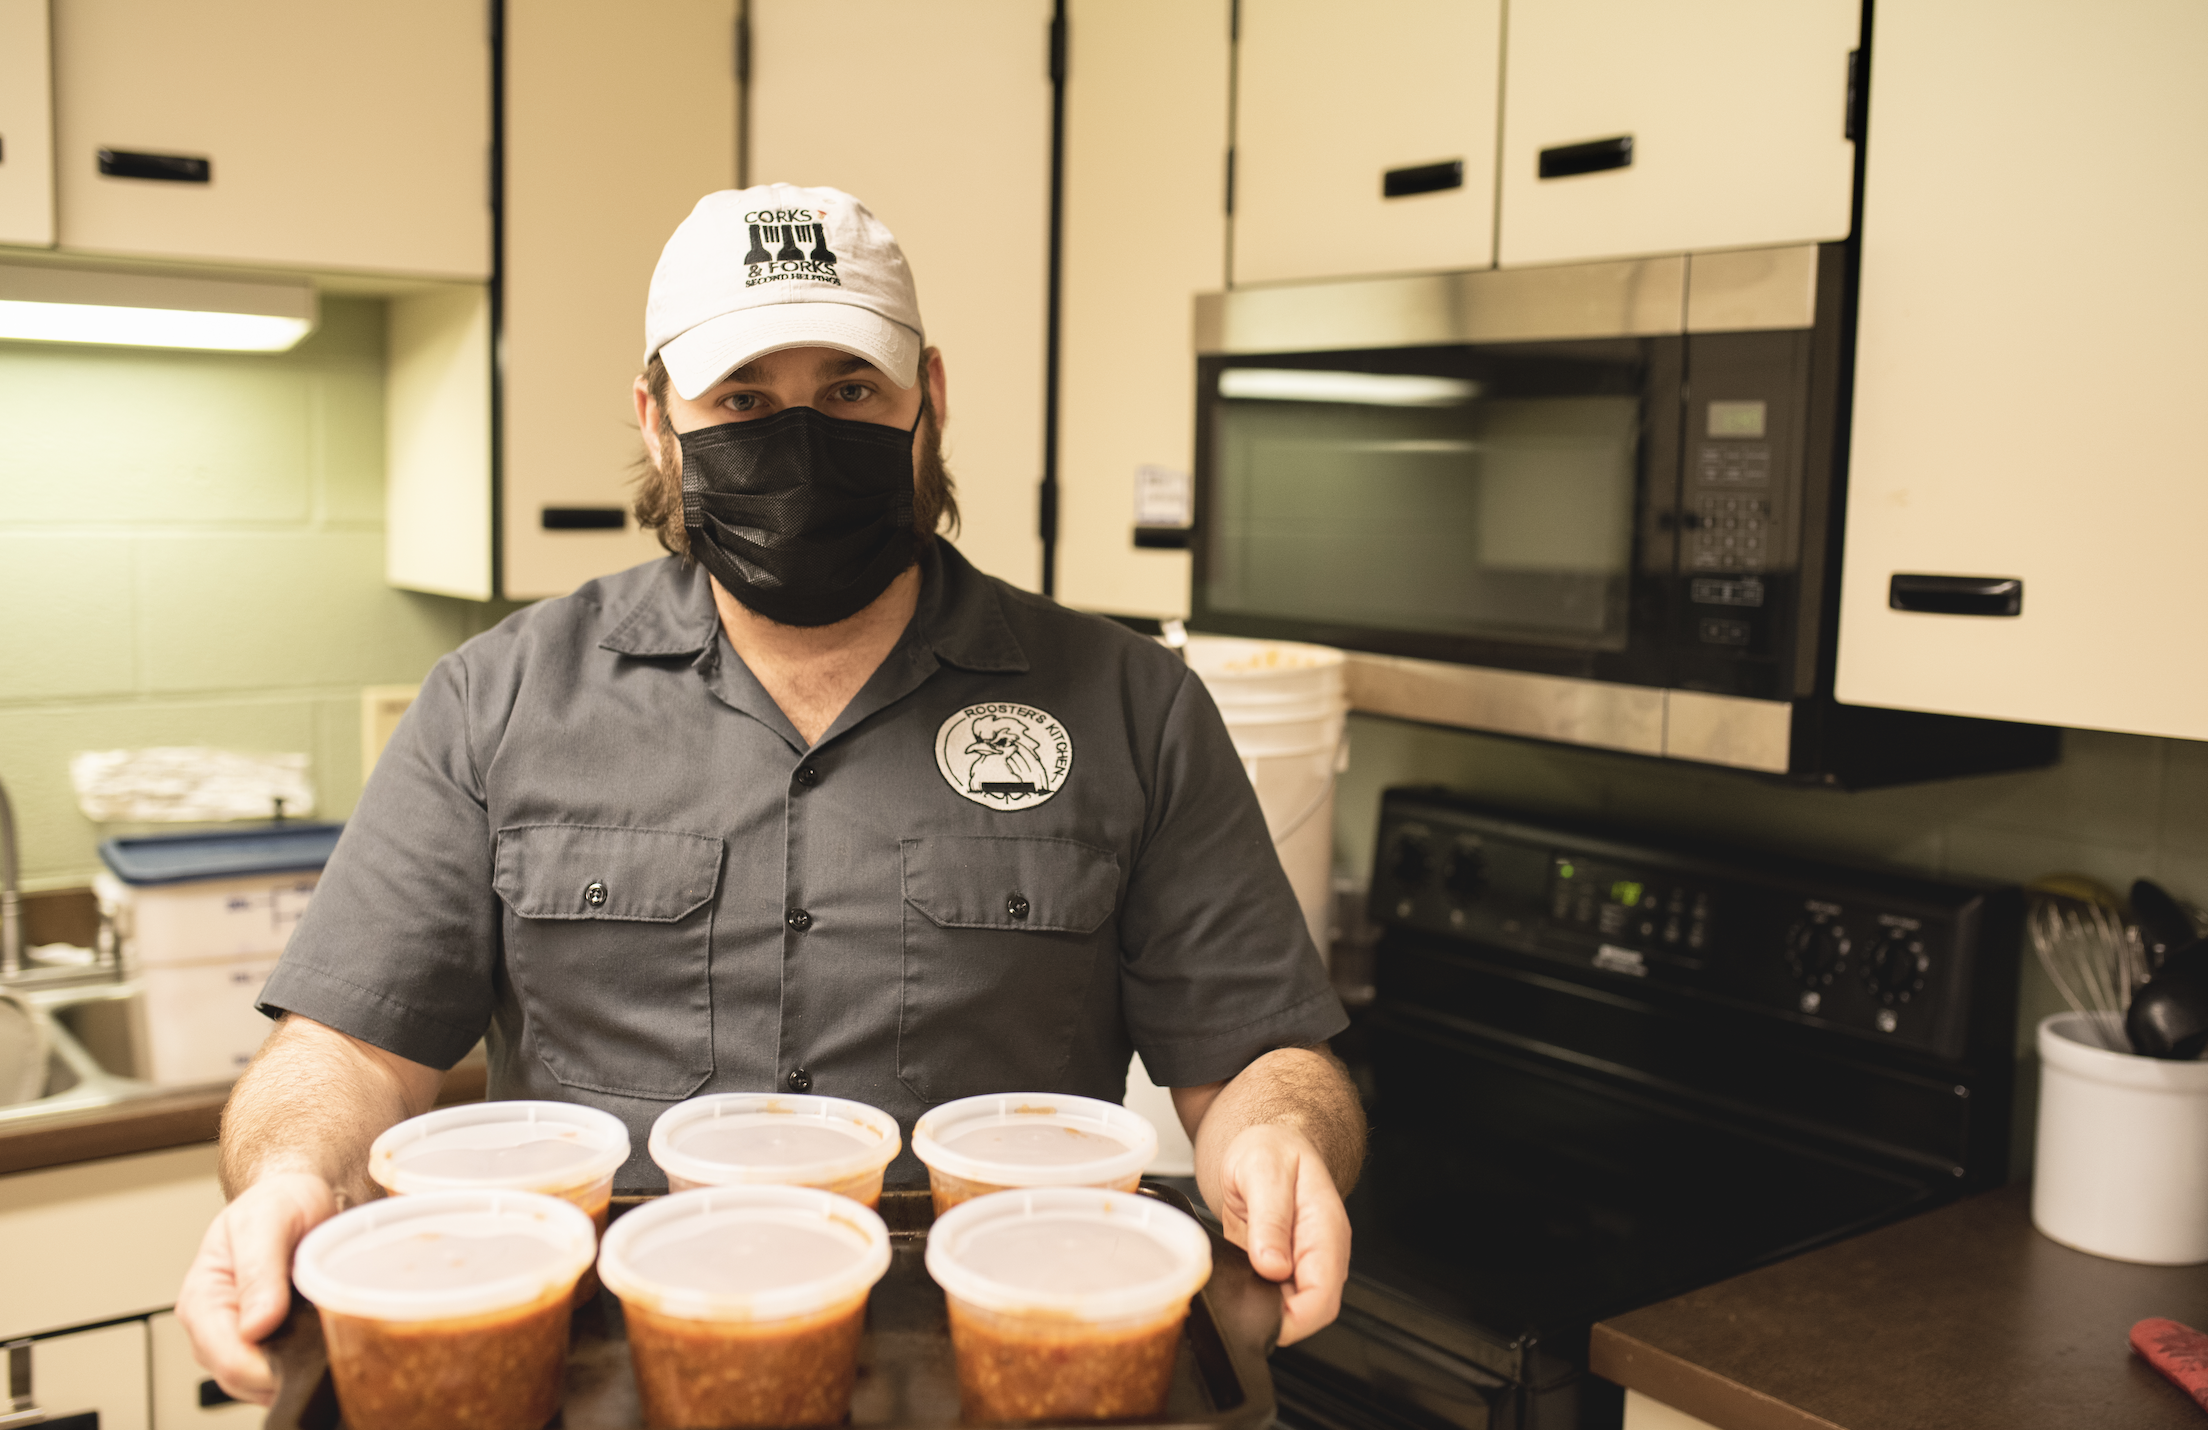 Ross Katz serves chili at No Questions asked Food Pantry